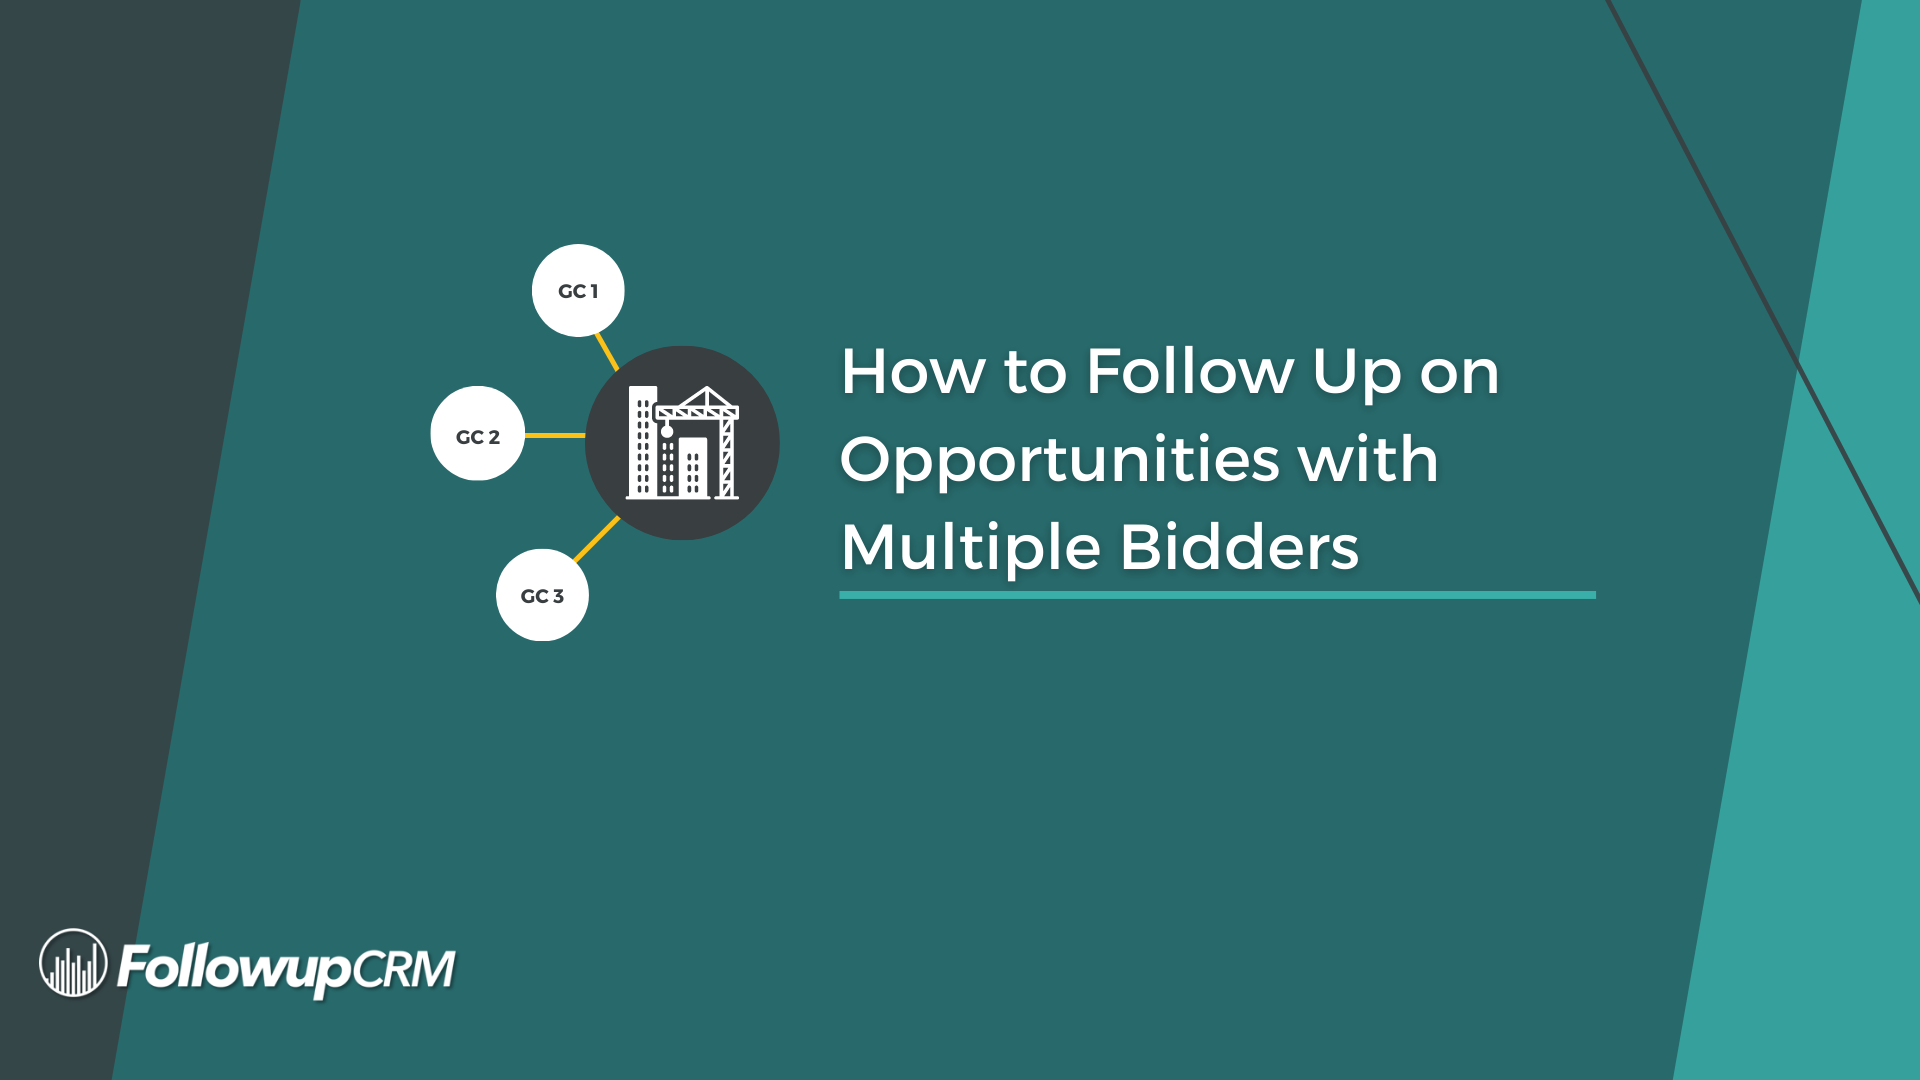 How to Follow Up on Opportunities with Multiple Bidders